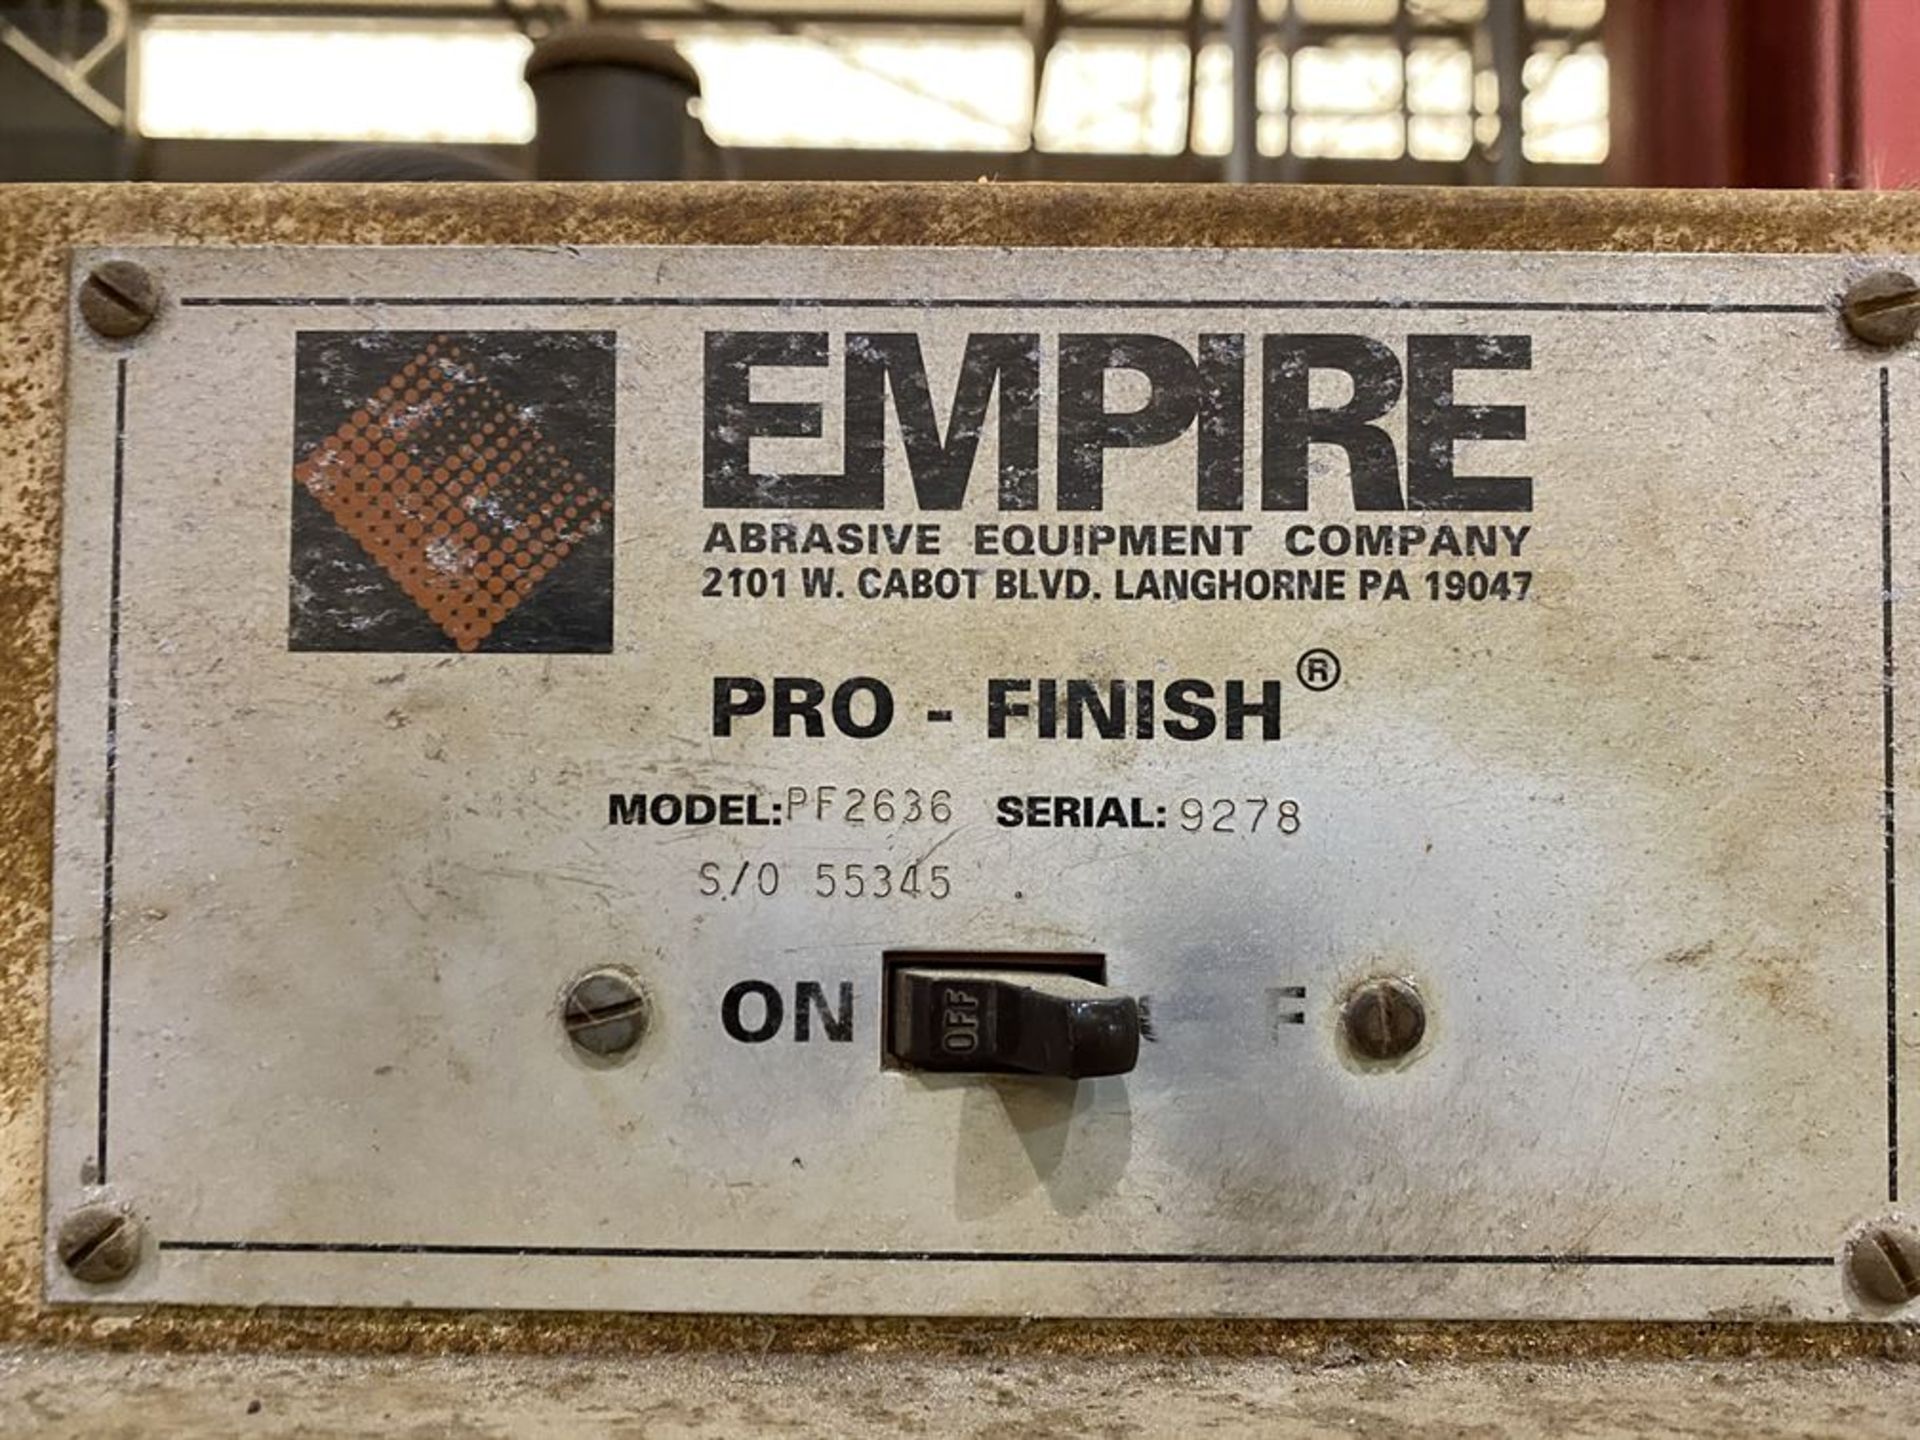 EMPIRE PRO-FINISH PF2636 Blast Cabinet, s/n 9278, w/ DCM-80A Collection System (Location: Machine - Image 3 of 3